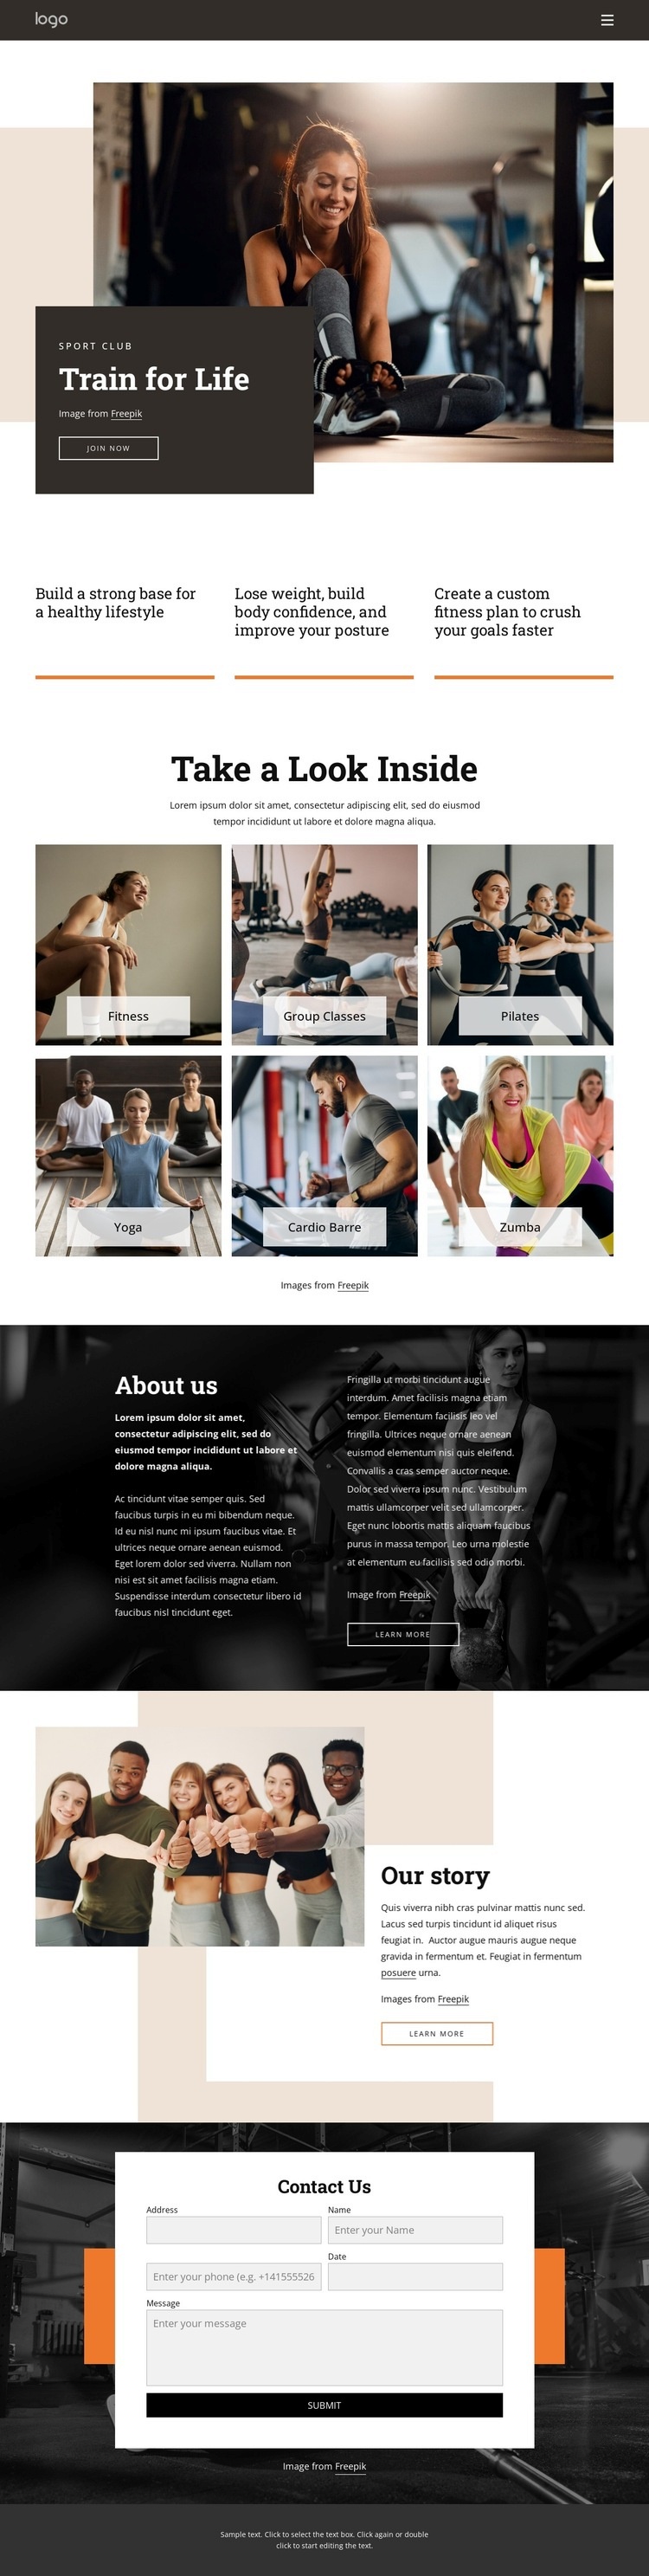 Get moving with our range of classes Homepage Design